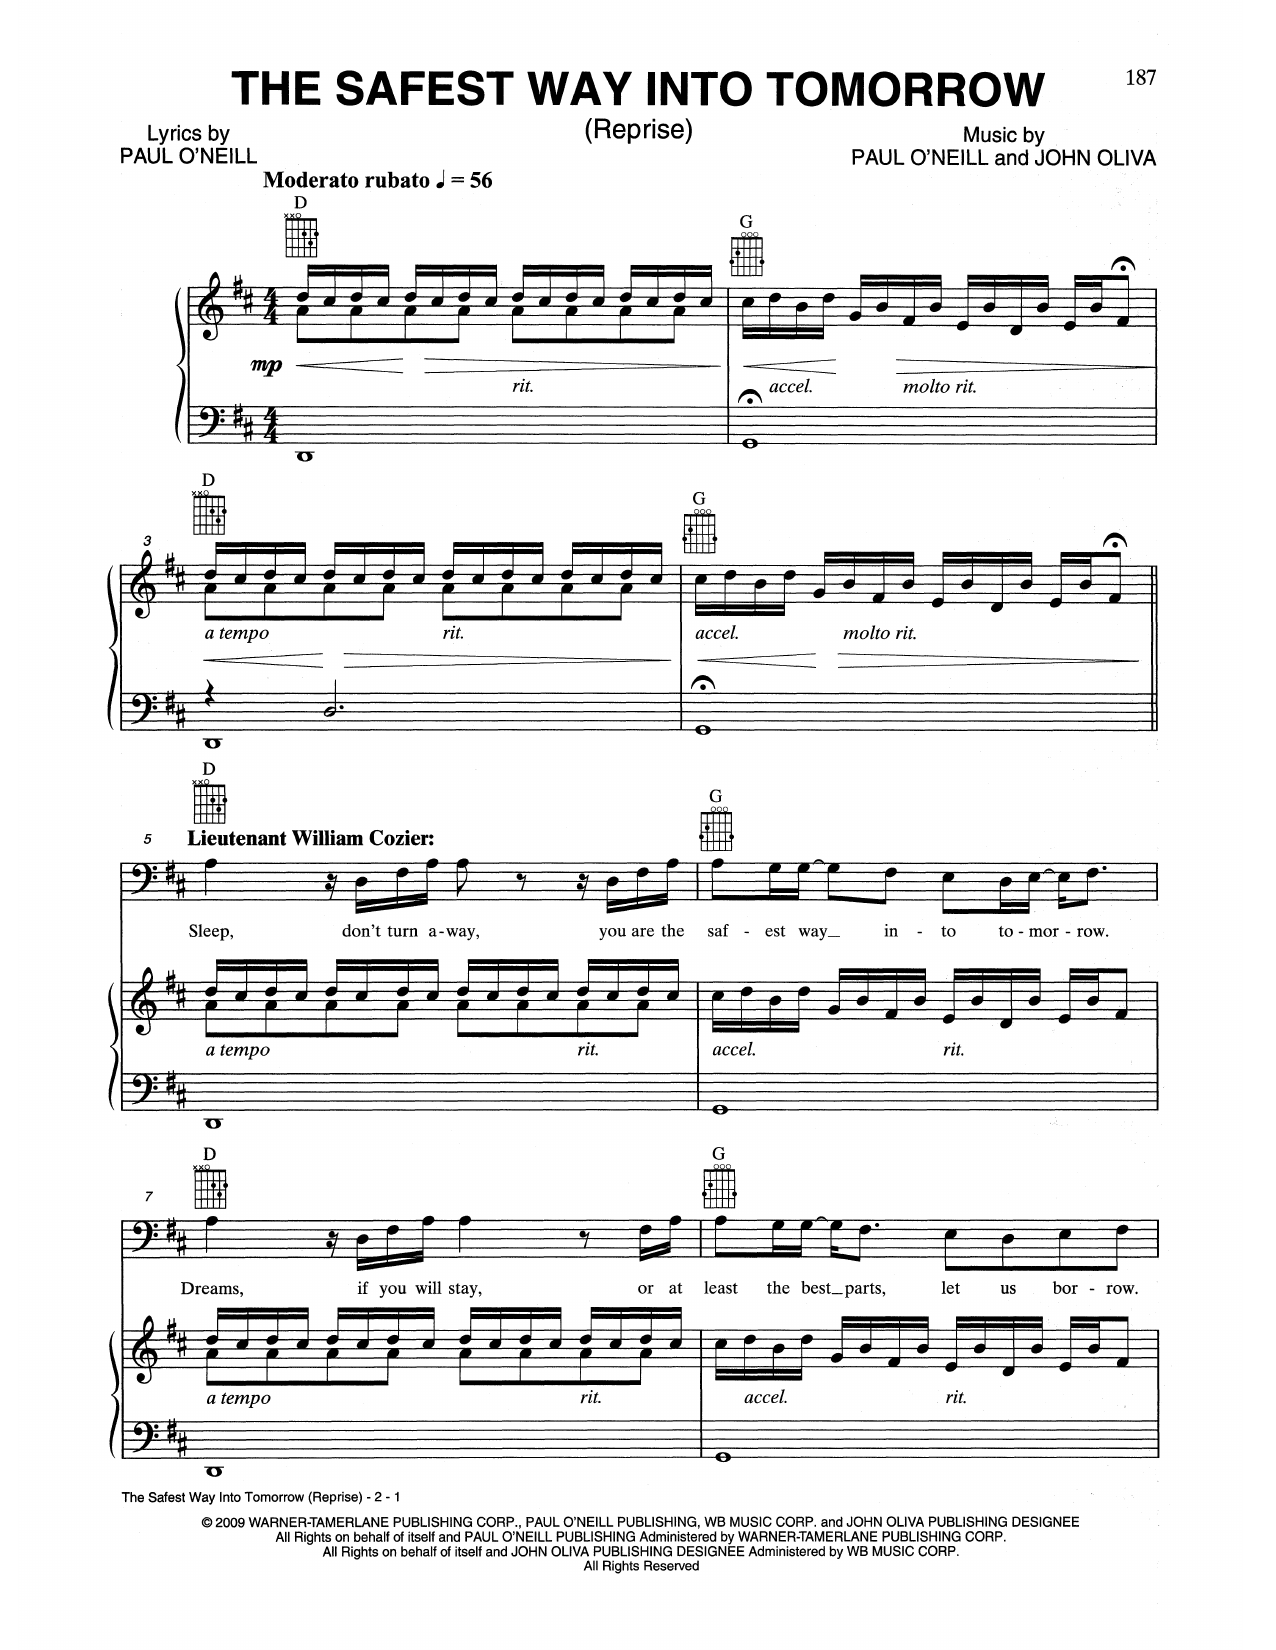 Download Trans-Siberian Orchestra The Safest Way Into Tomorrow (Reprise) Sheet Music